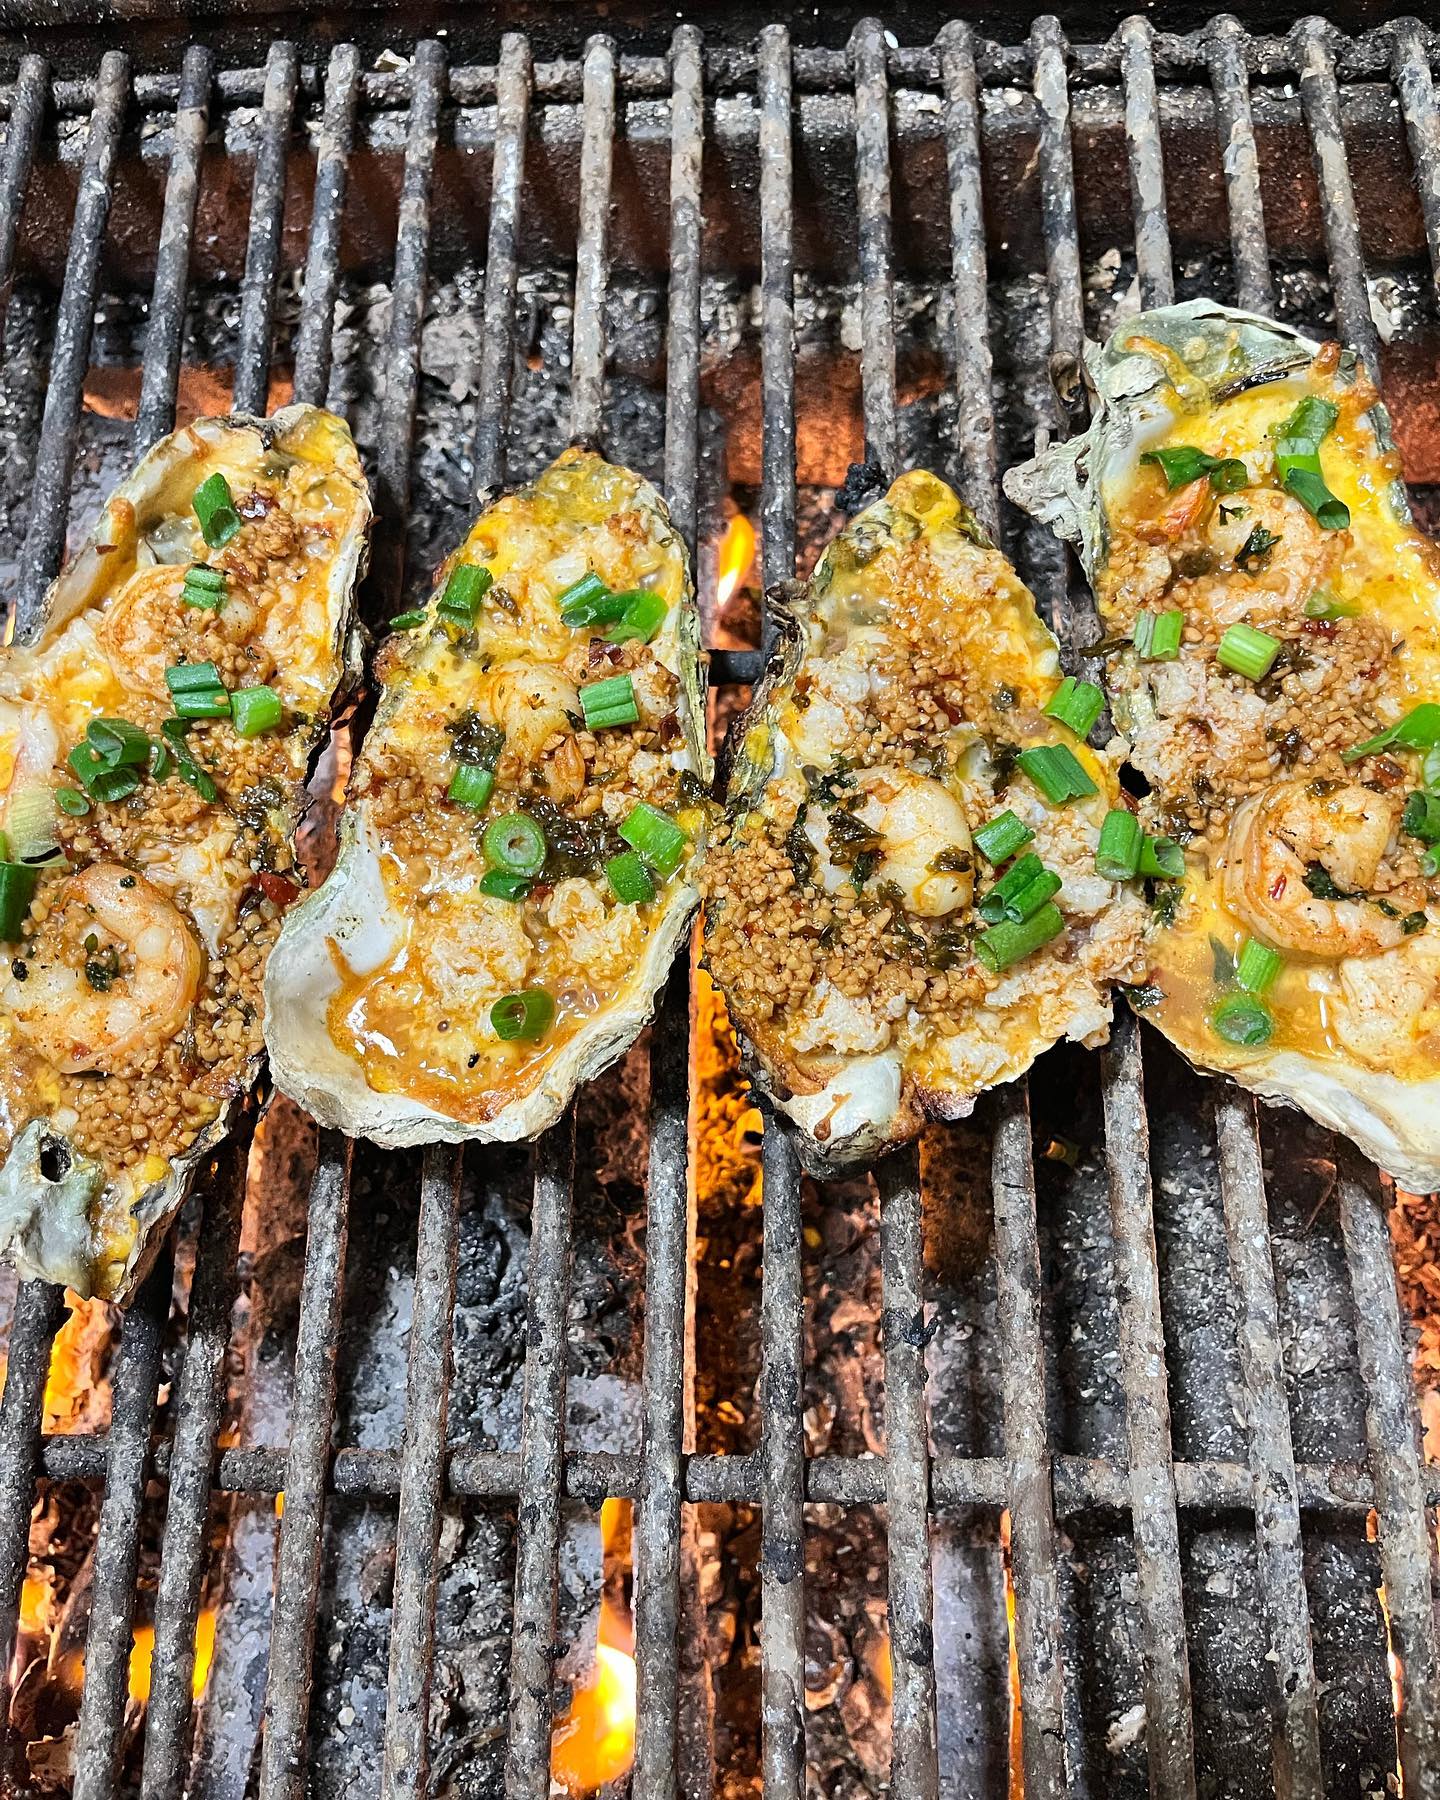 Four oysters, elaborately topped with shrimp, cheese and spices, on a grill.